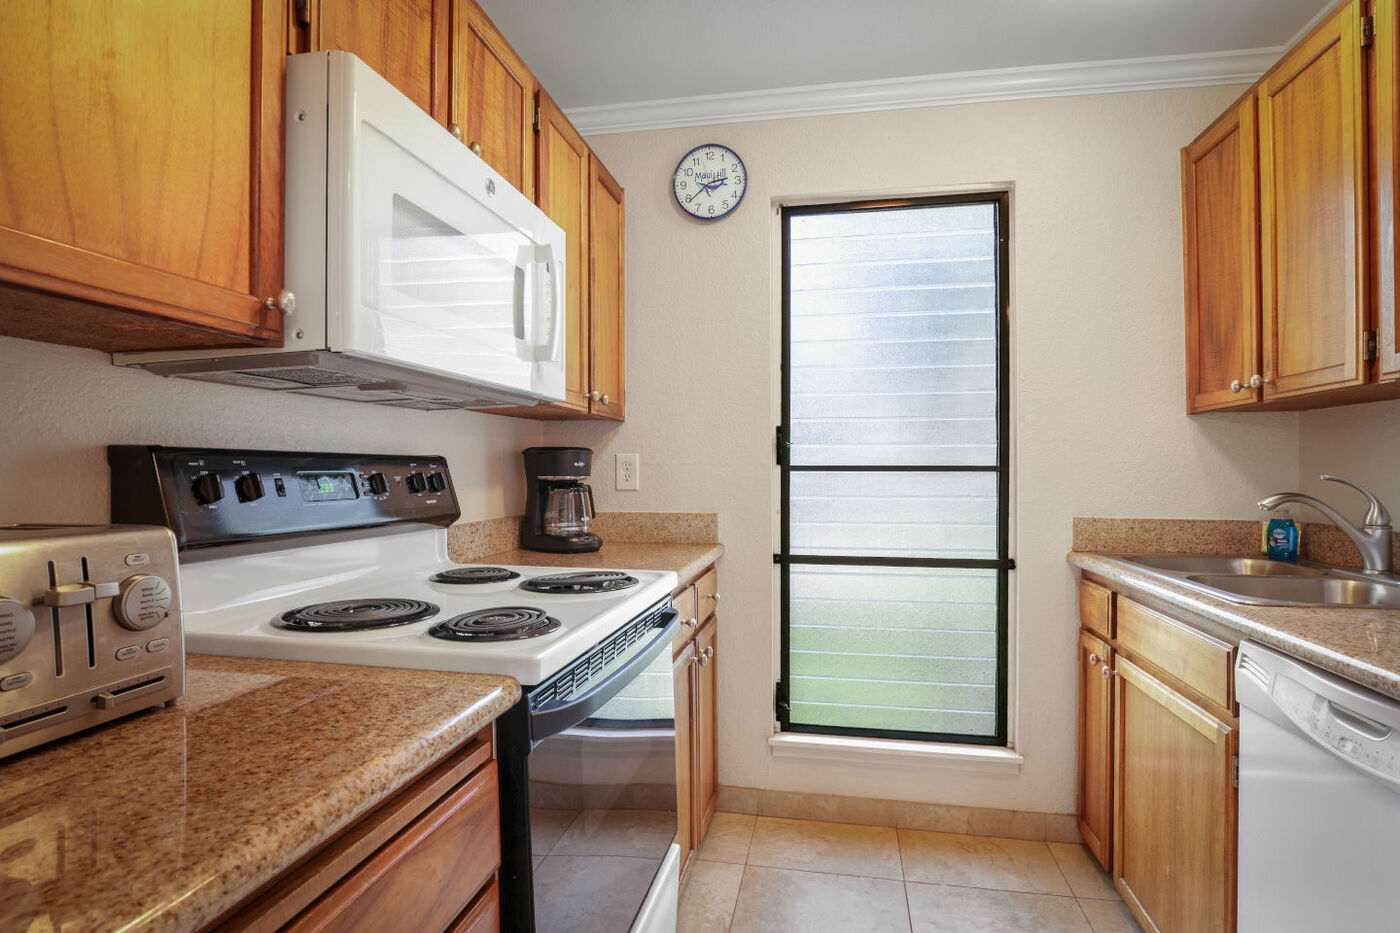 Full kitchen with a four-burner cooktop stove, marble countertops, microwave, coffee maker and toaster. 